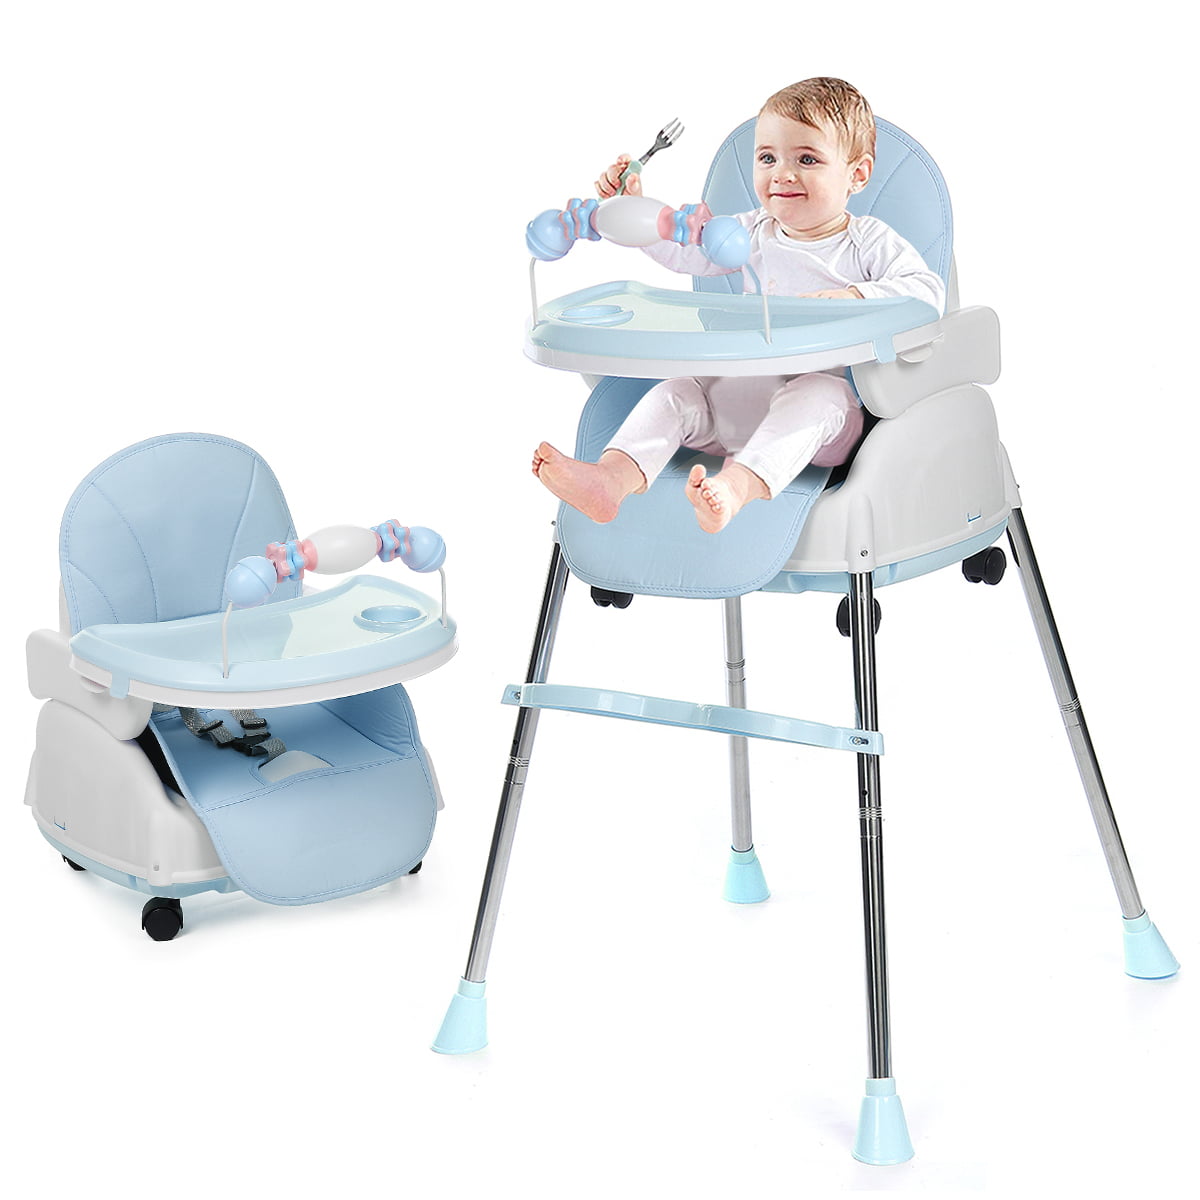 Baby portable high chair seat safety belt foldable sacking dinning seat beltRSPF 